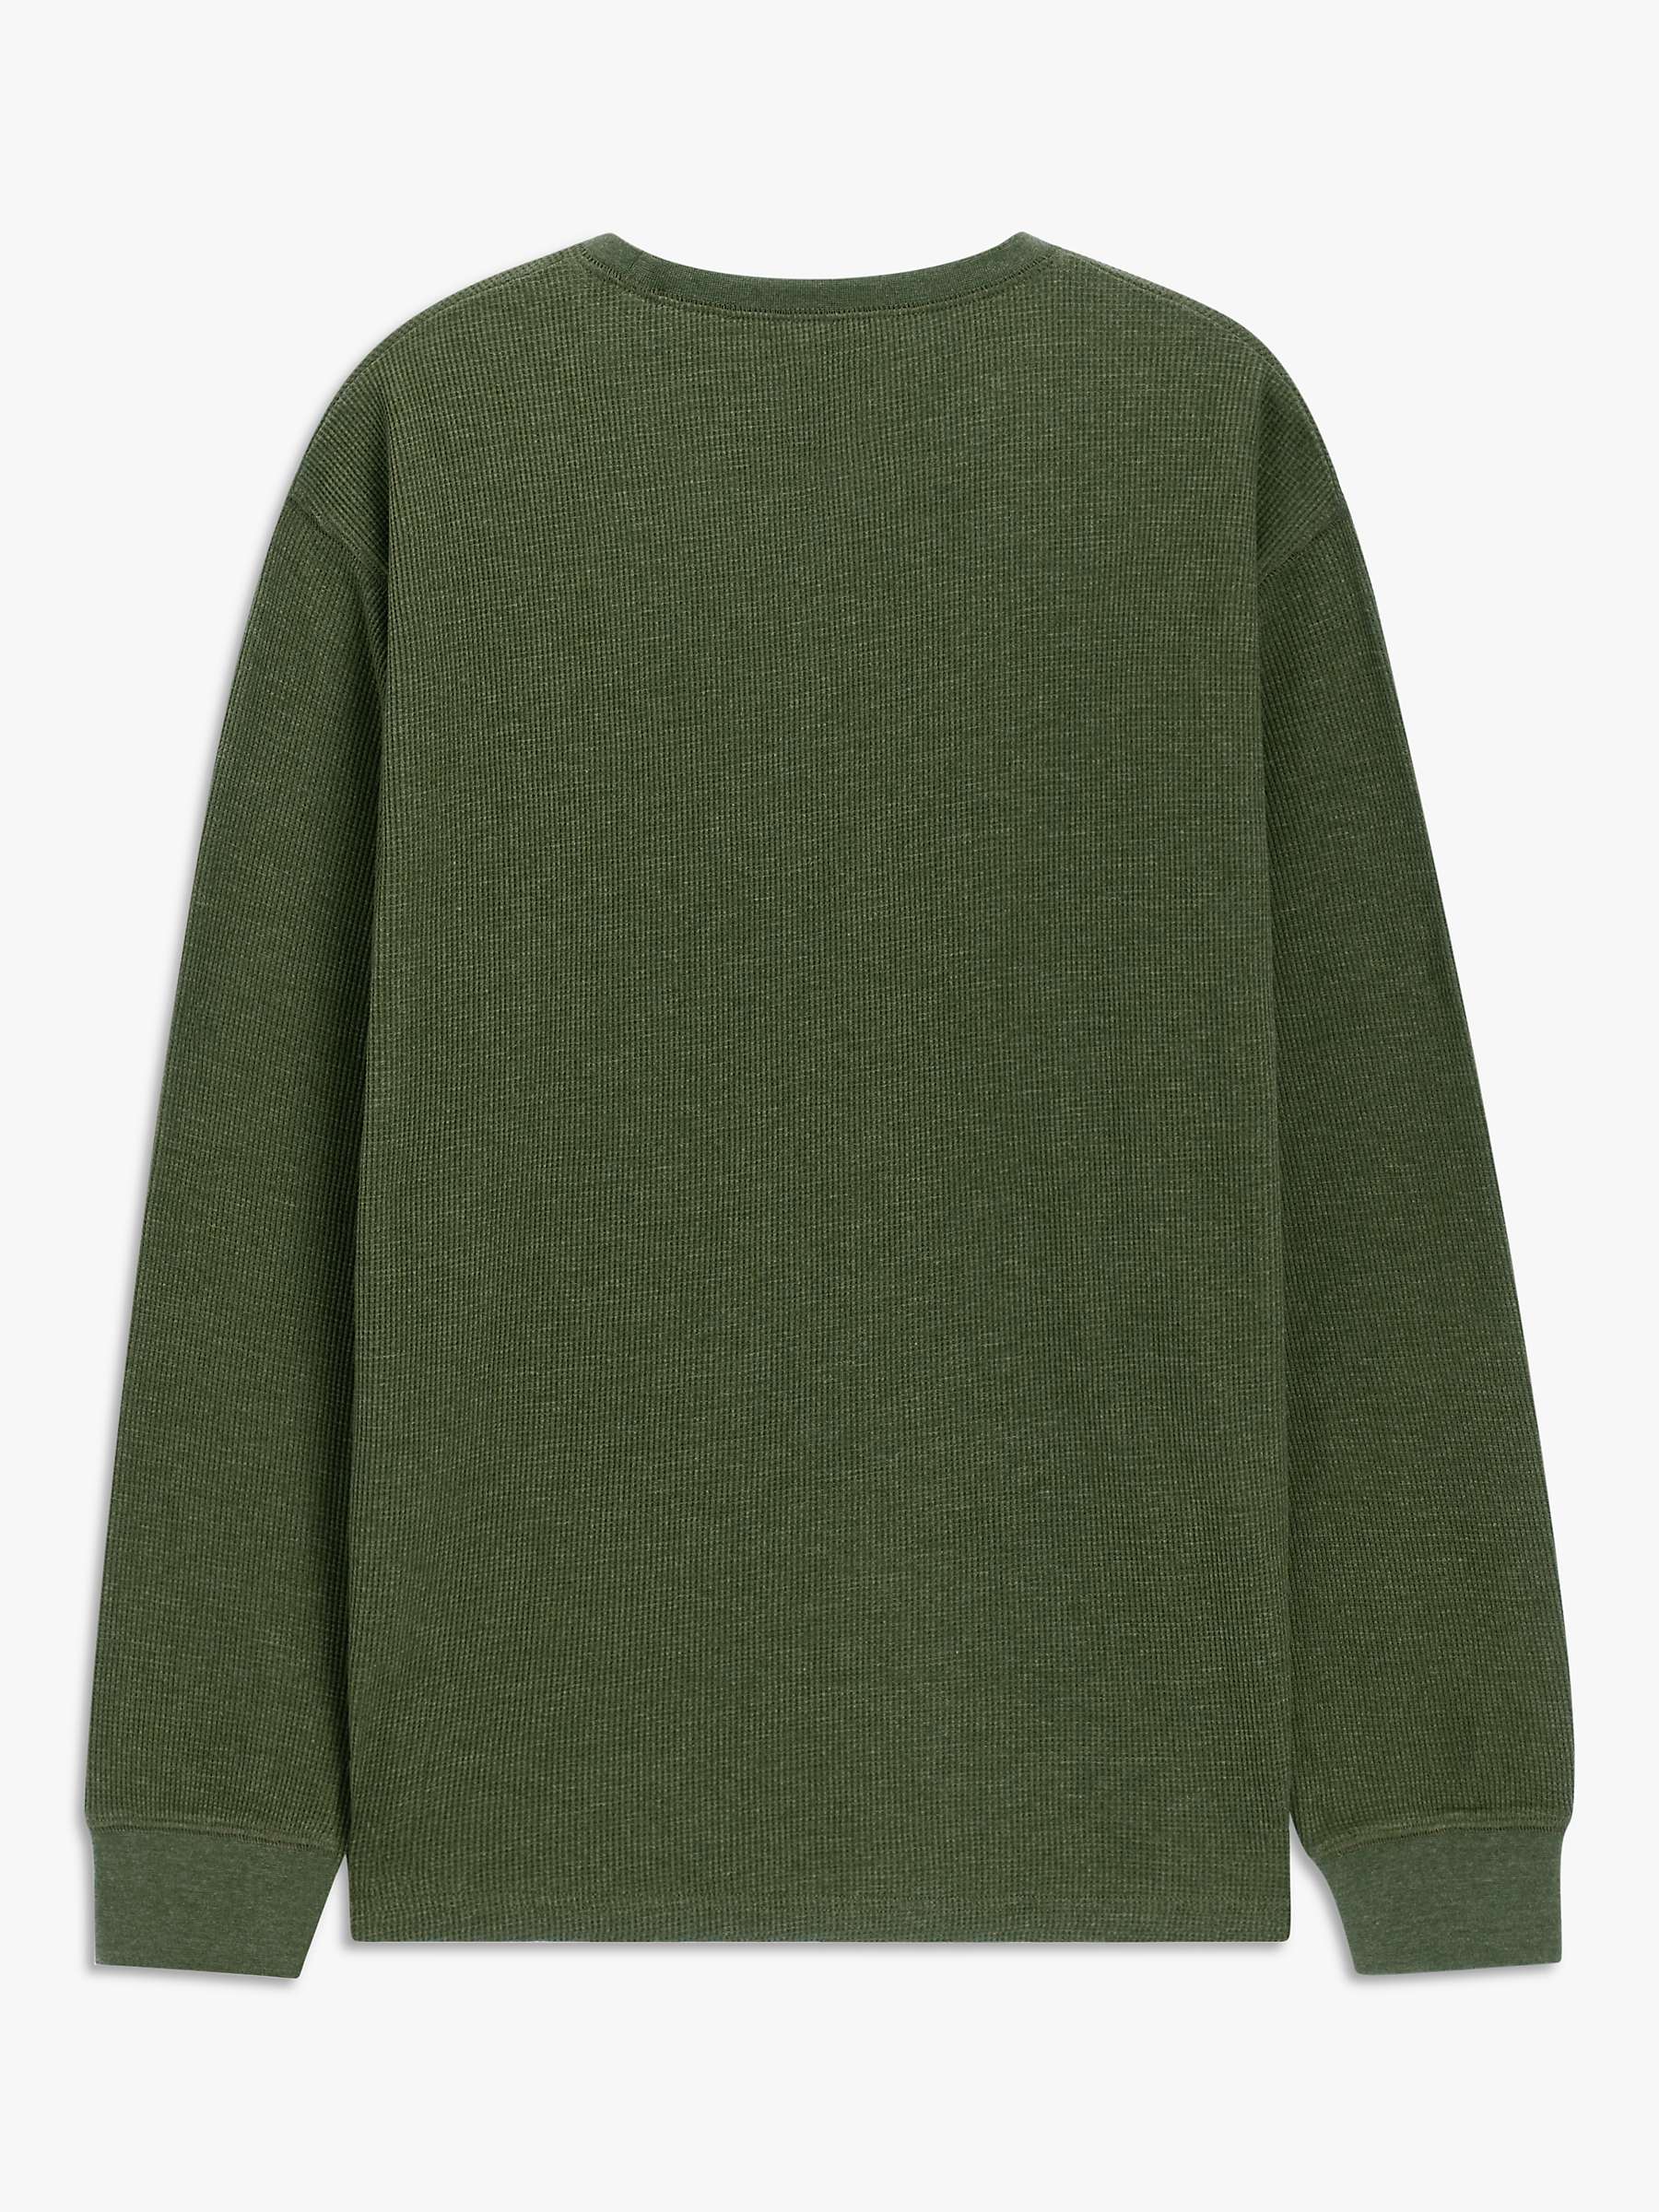 Buy John Lewis ANYDAY Waffle Cotton Blend Long Sleeve Lounge Top Online at johnlewis.com